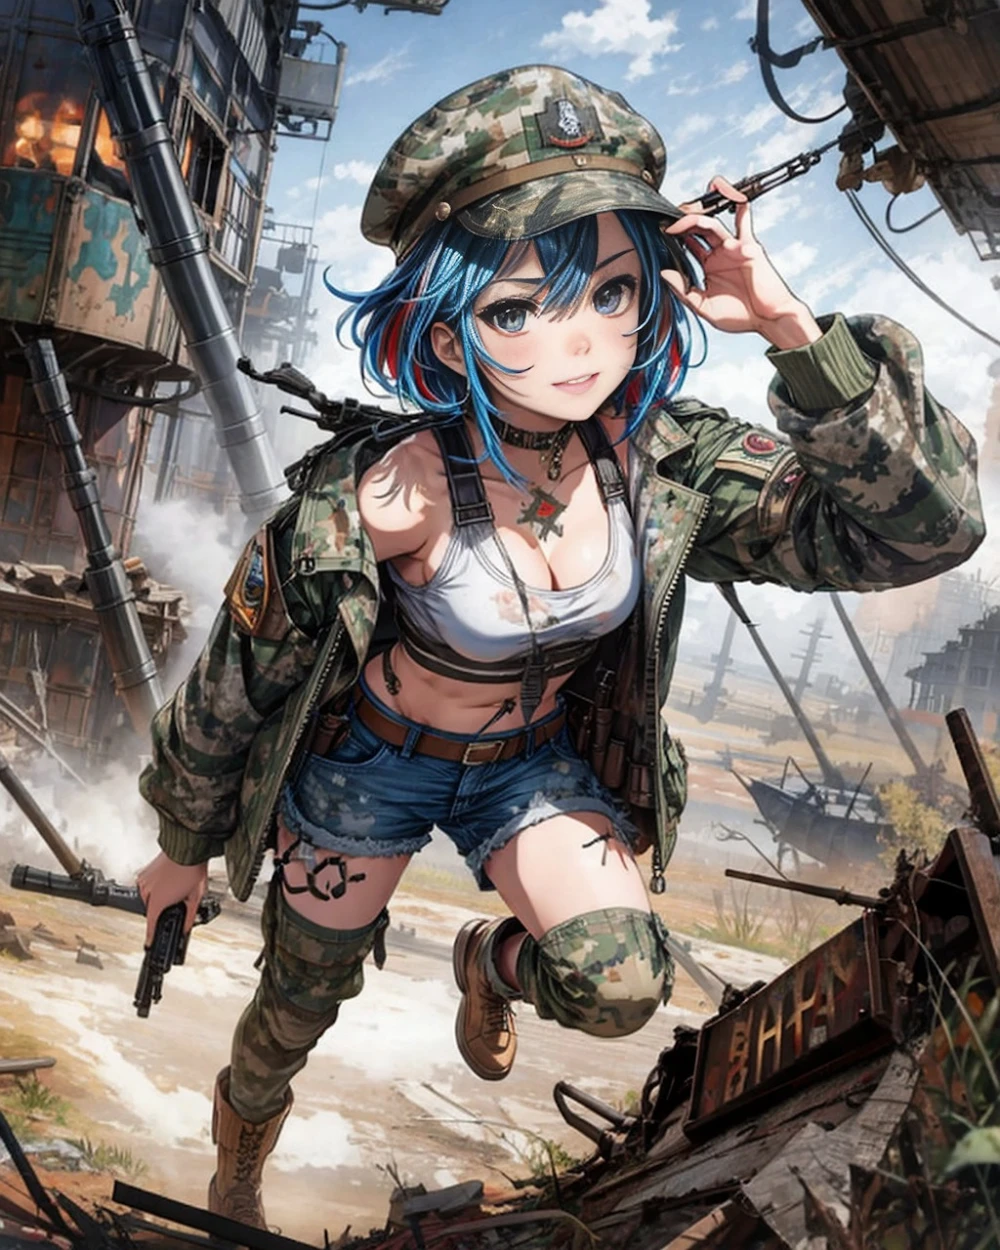 military-uniform-anime-style-all-ages-41